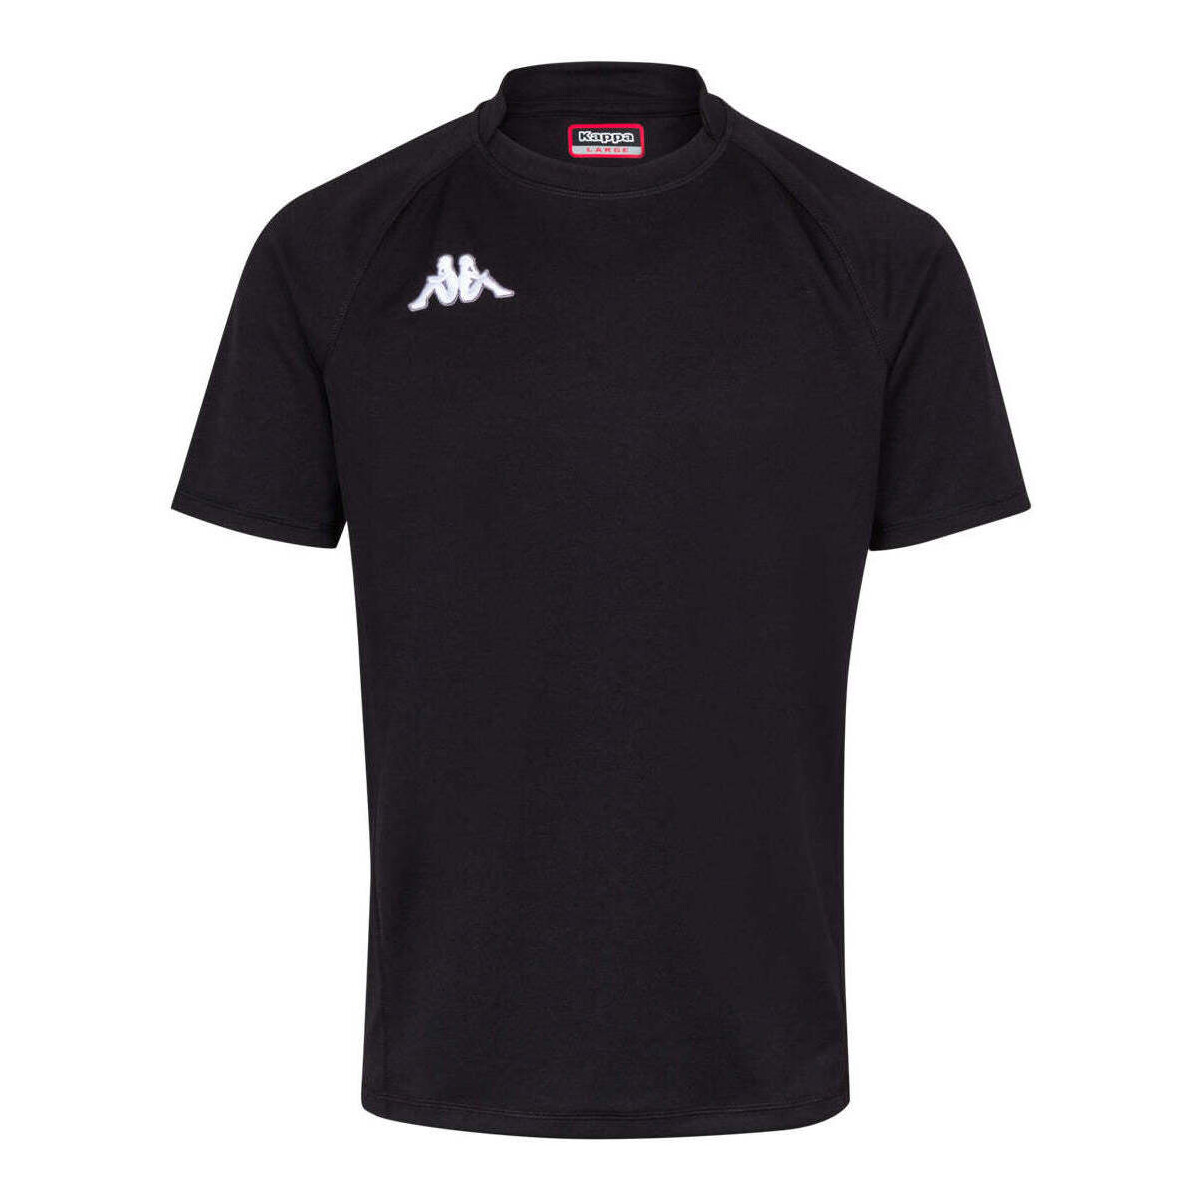 Vêtements Homme T-shirts manches courtes Kappa Maillot Rugby Telese Noir